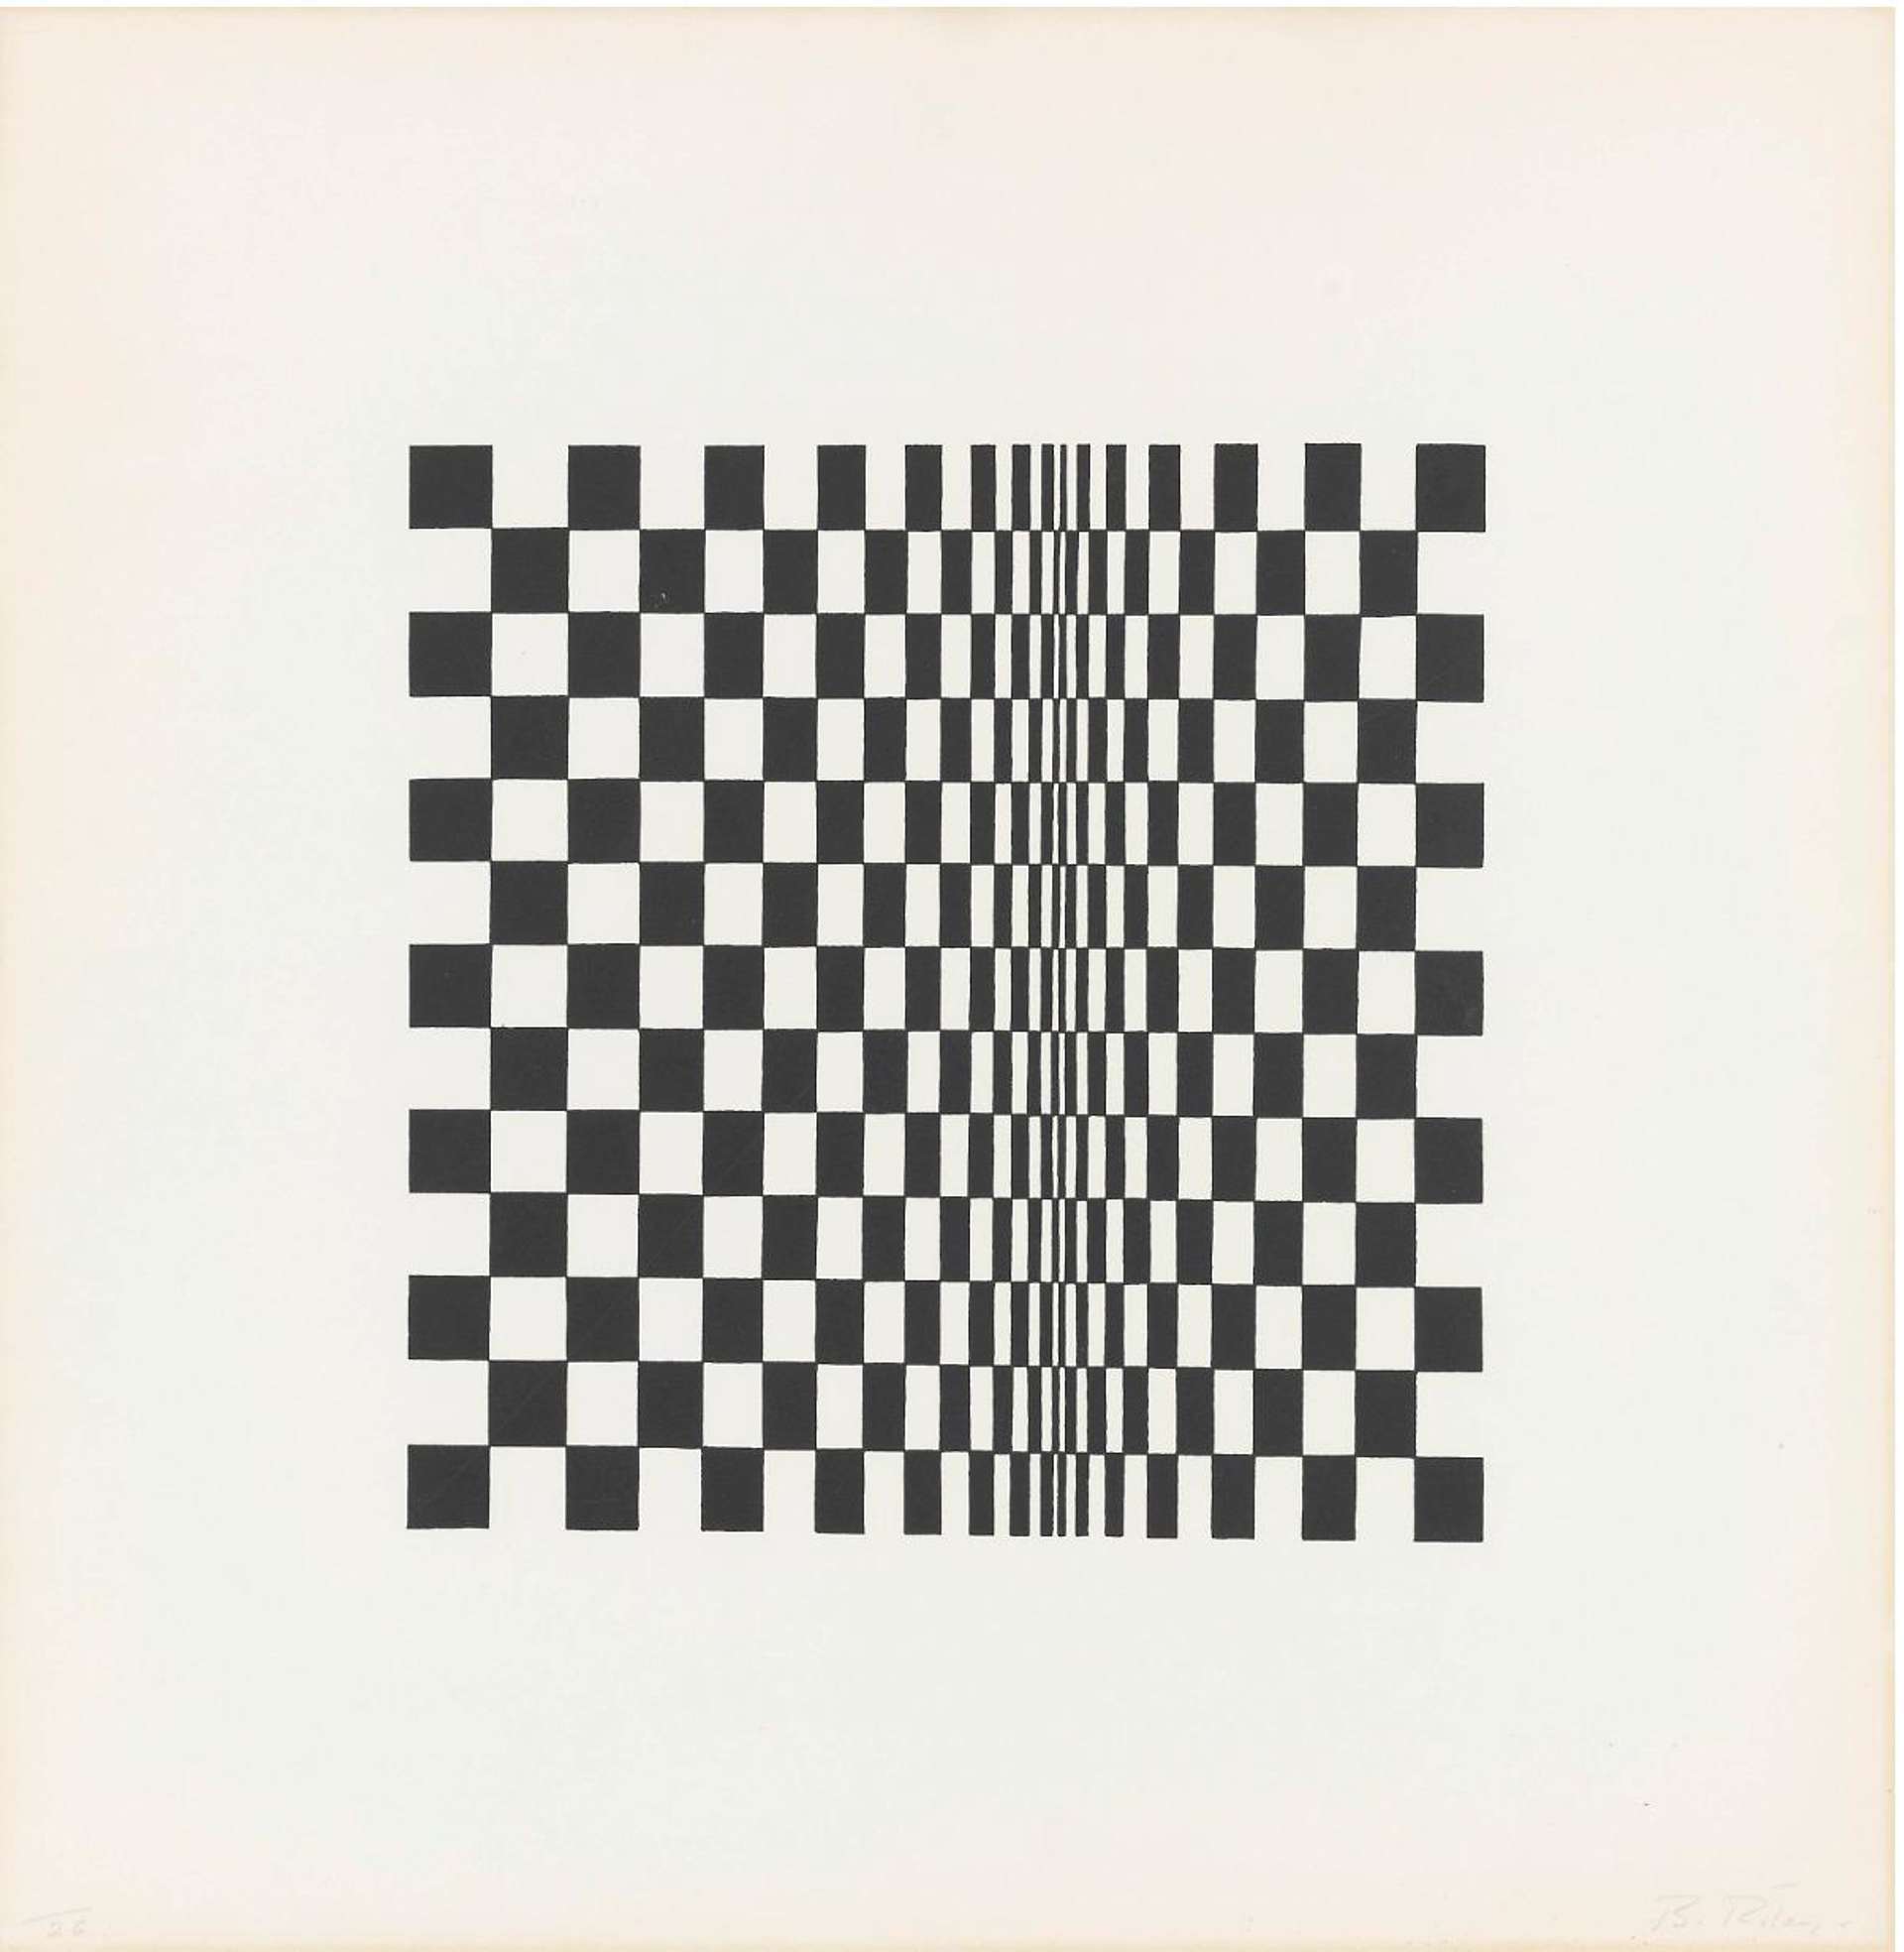 Bridget Riley: Untitled (Based On Movement In Squares) - Signed Print